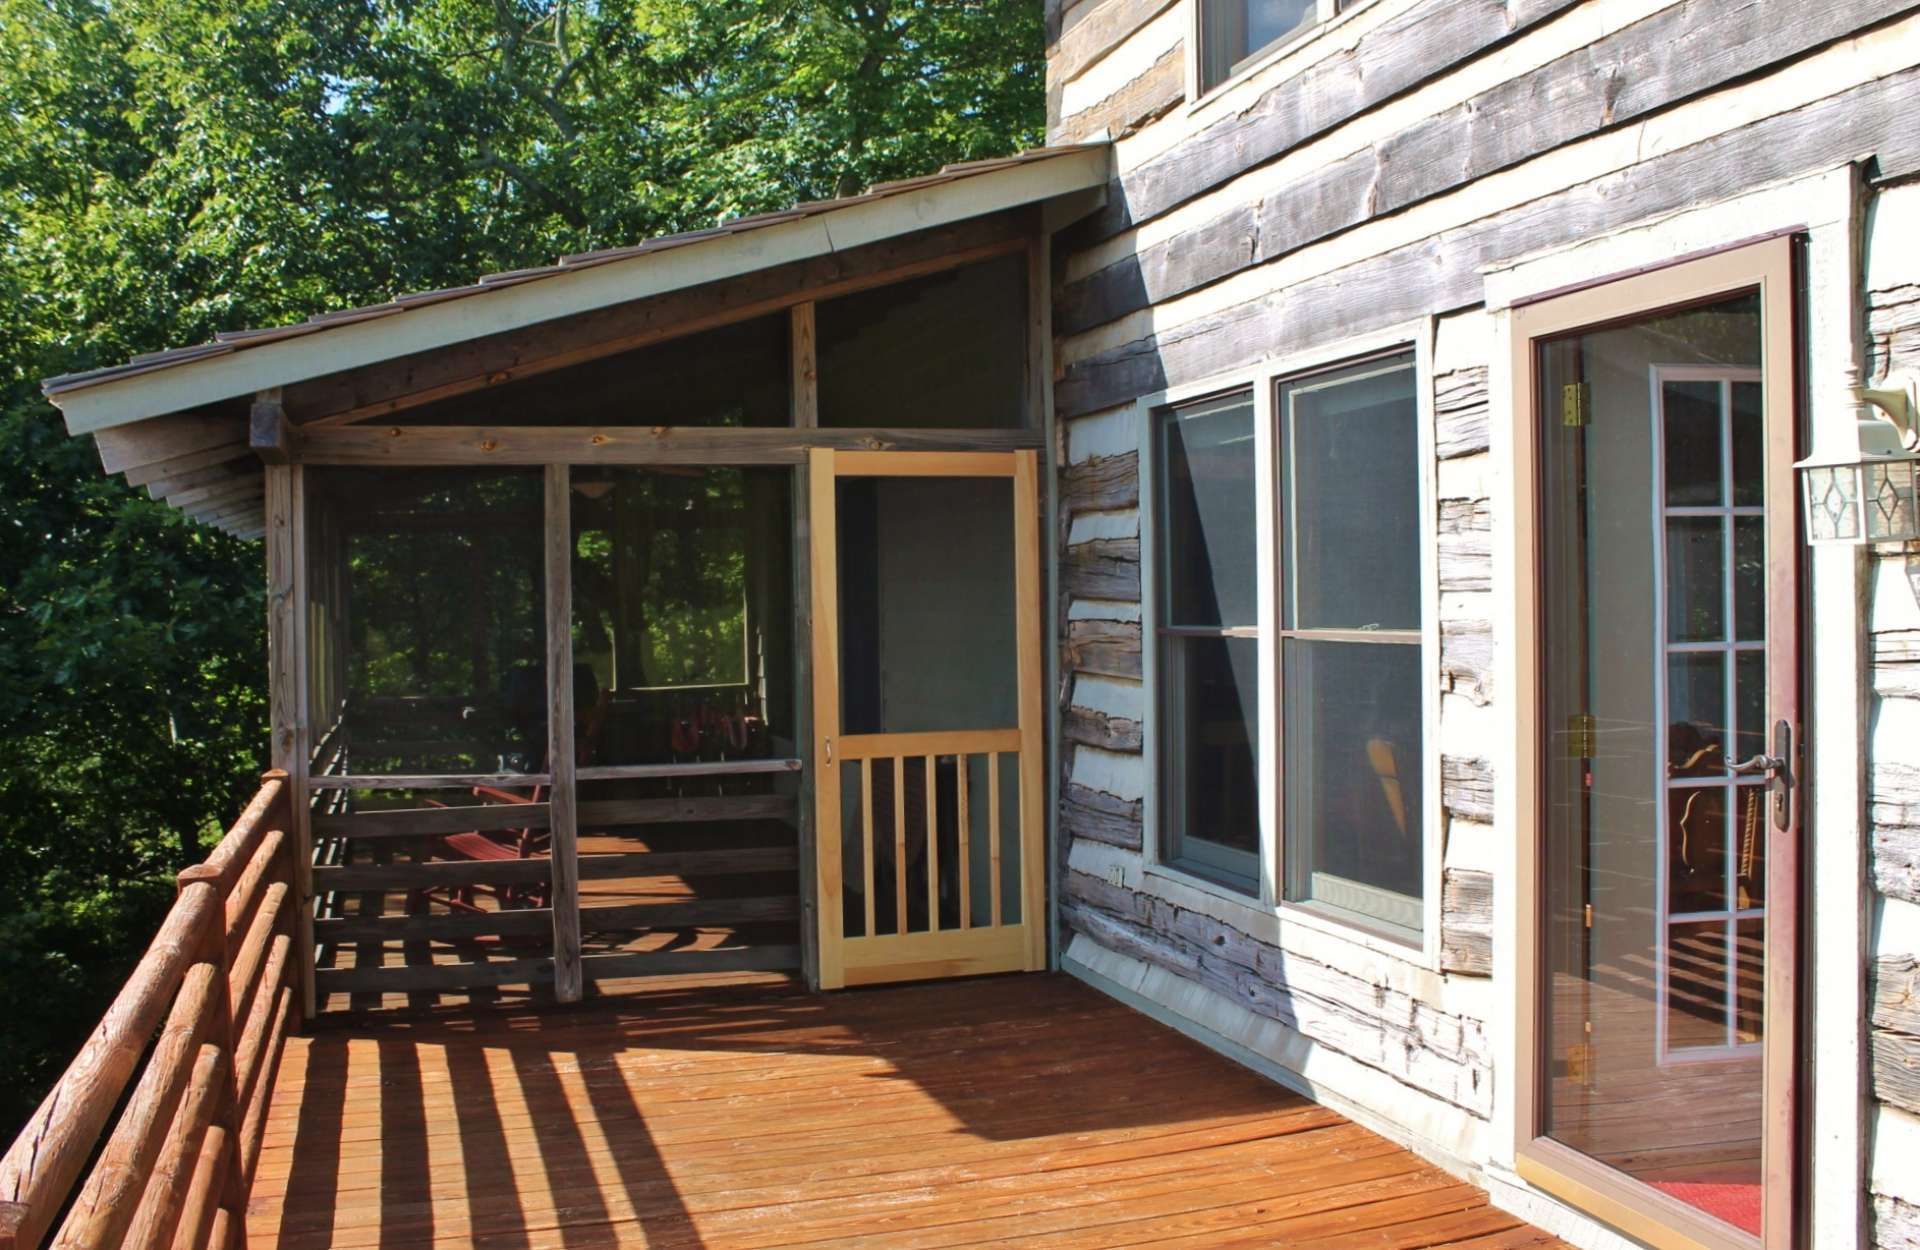 Easy access to the back deck, with screened in porch, allows you to take the party outdoors and enjoy the views, the sounds of Nature, and the fresh mountain air.